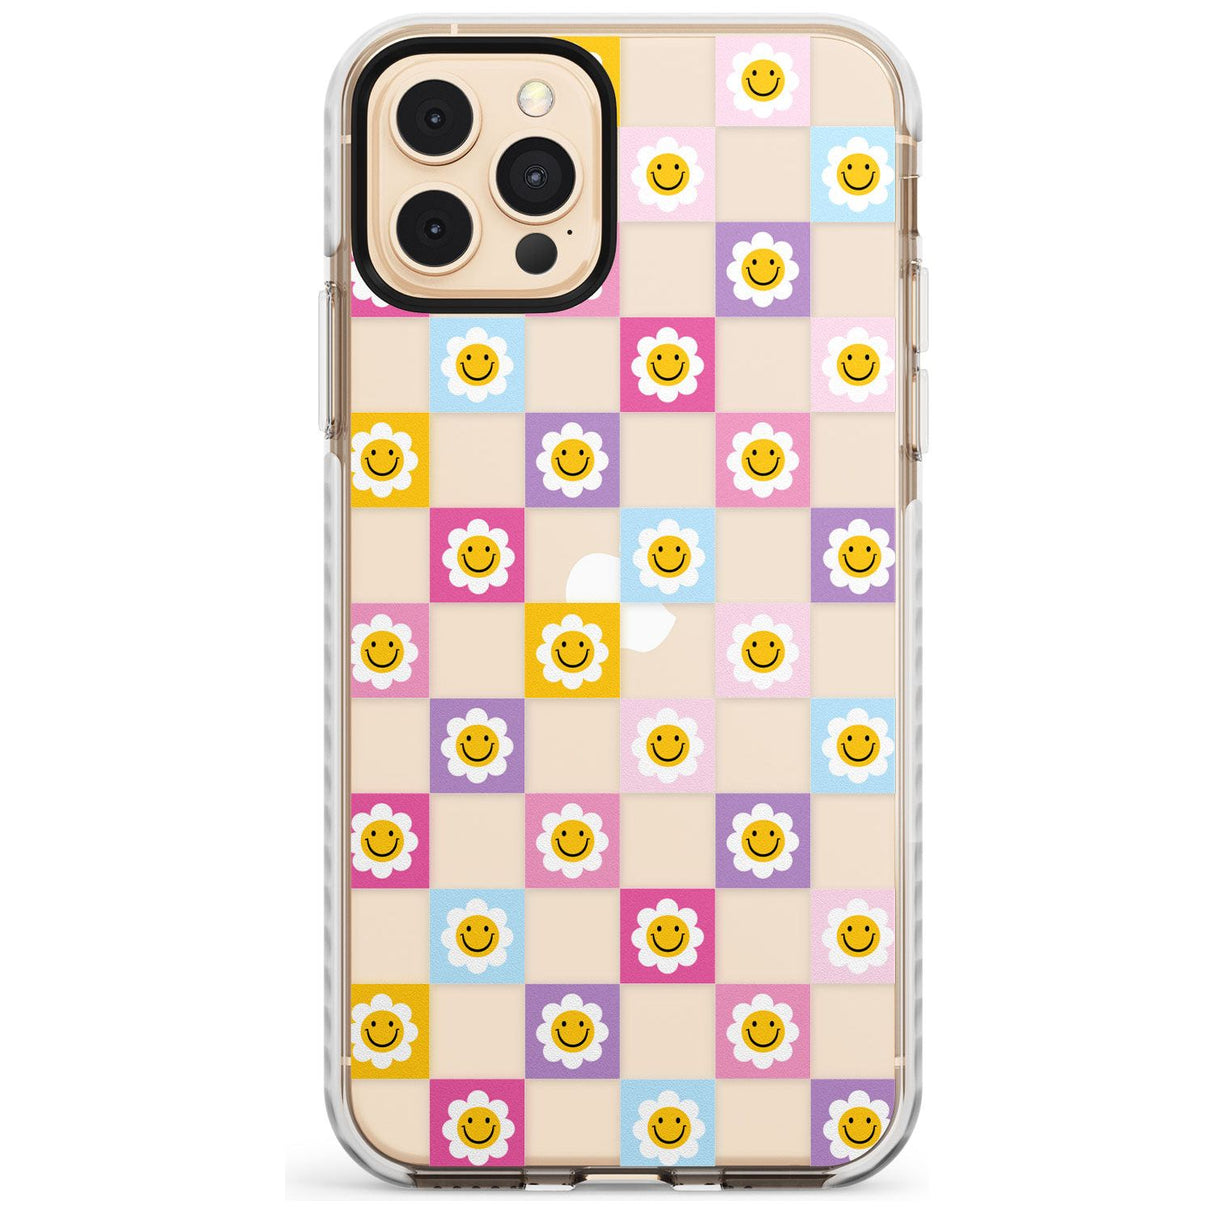 Daisy Squares Pattern Impact Phone Case for iPhone 11 Pro Max